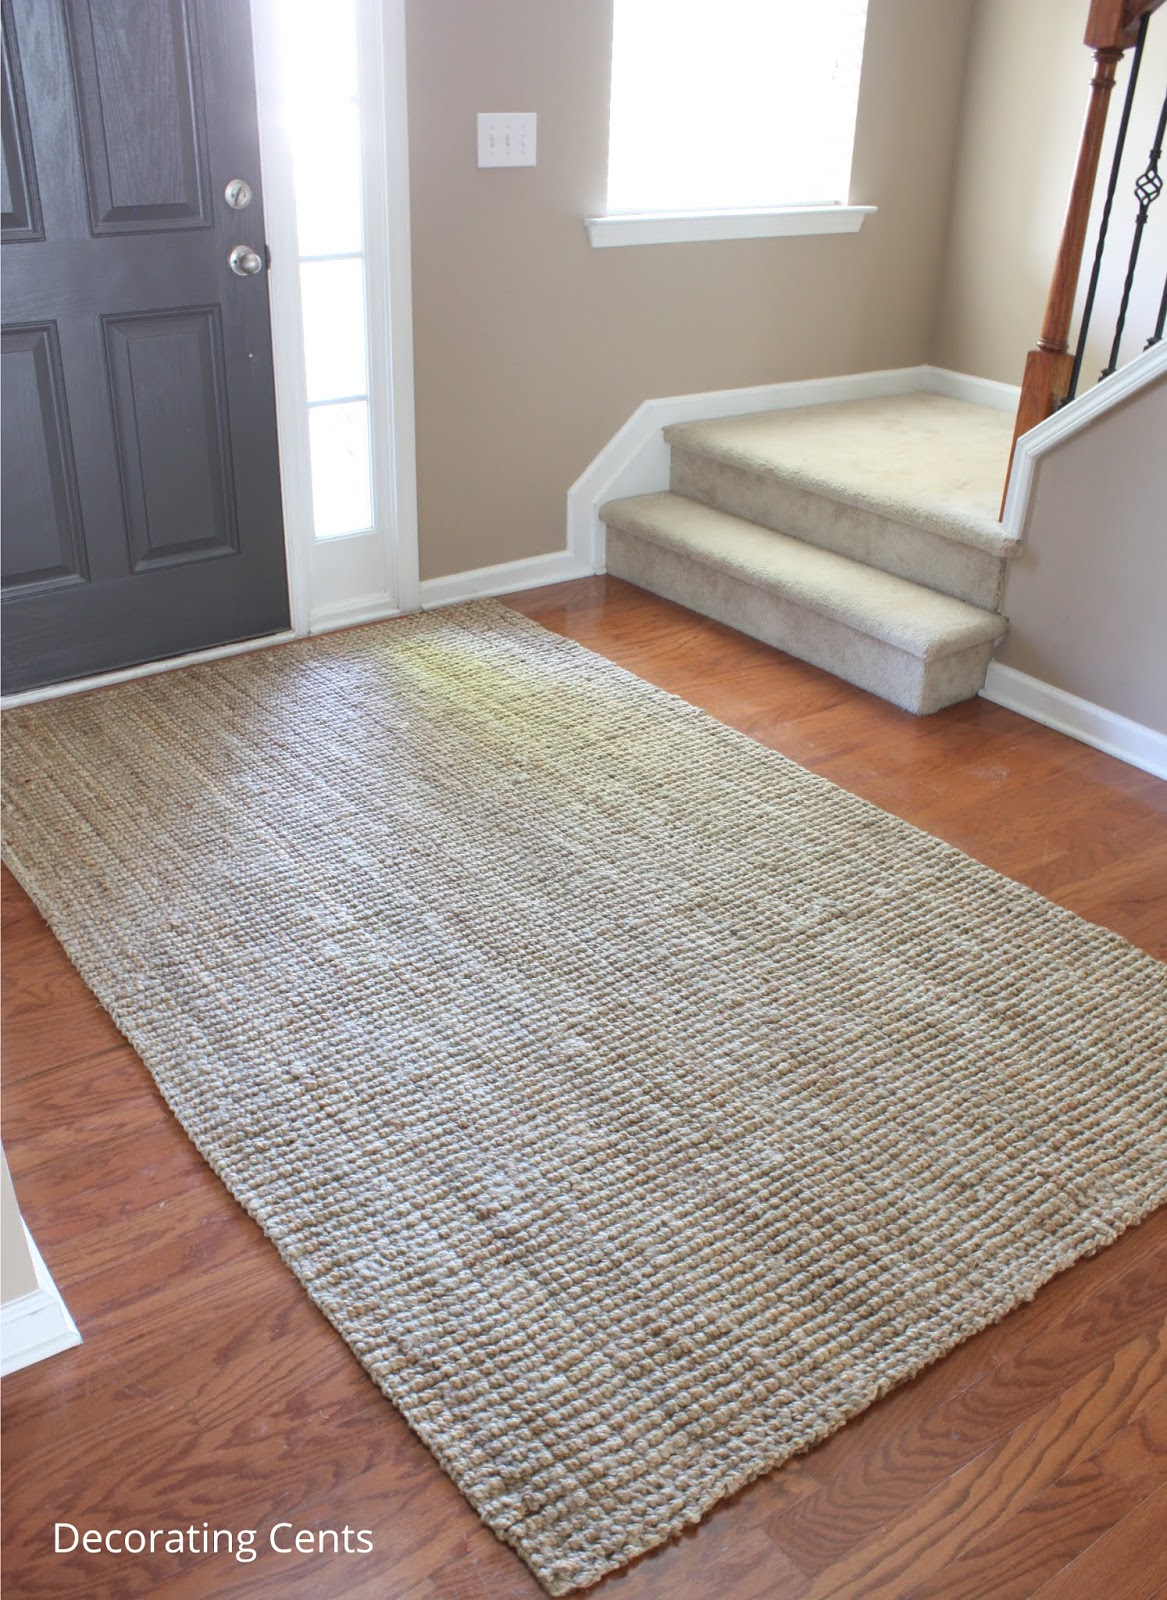 A New Entry Rug